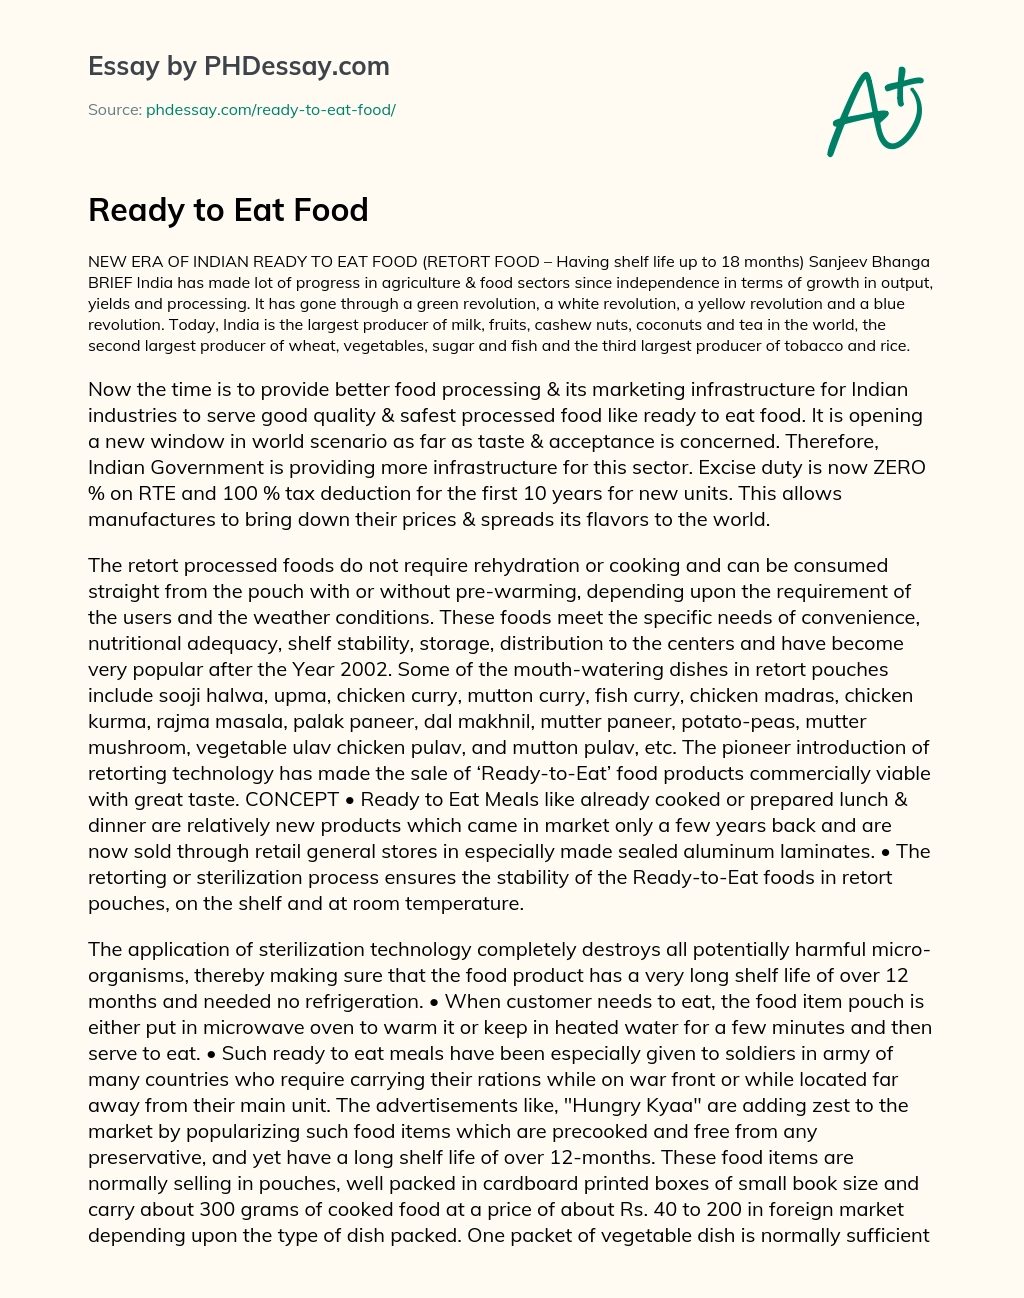 Ready to Eat Food essay